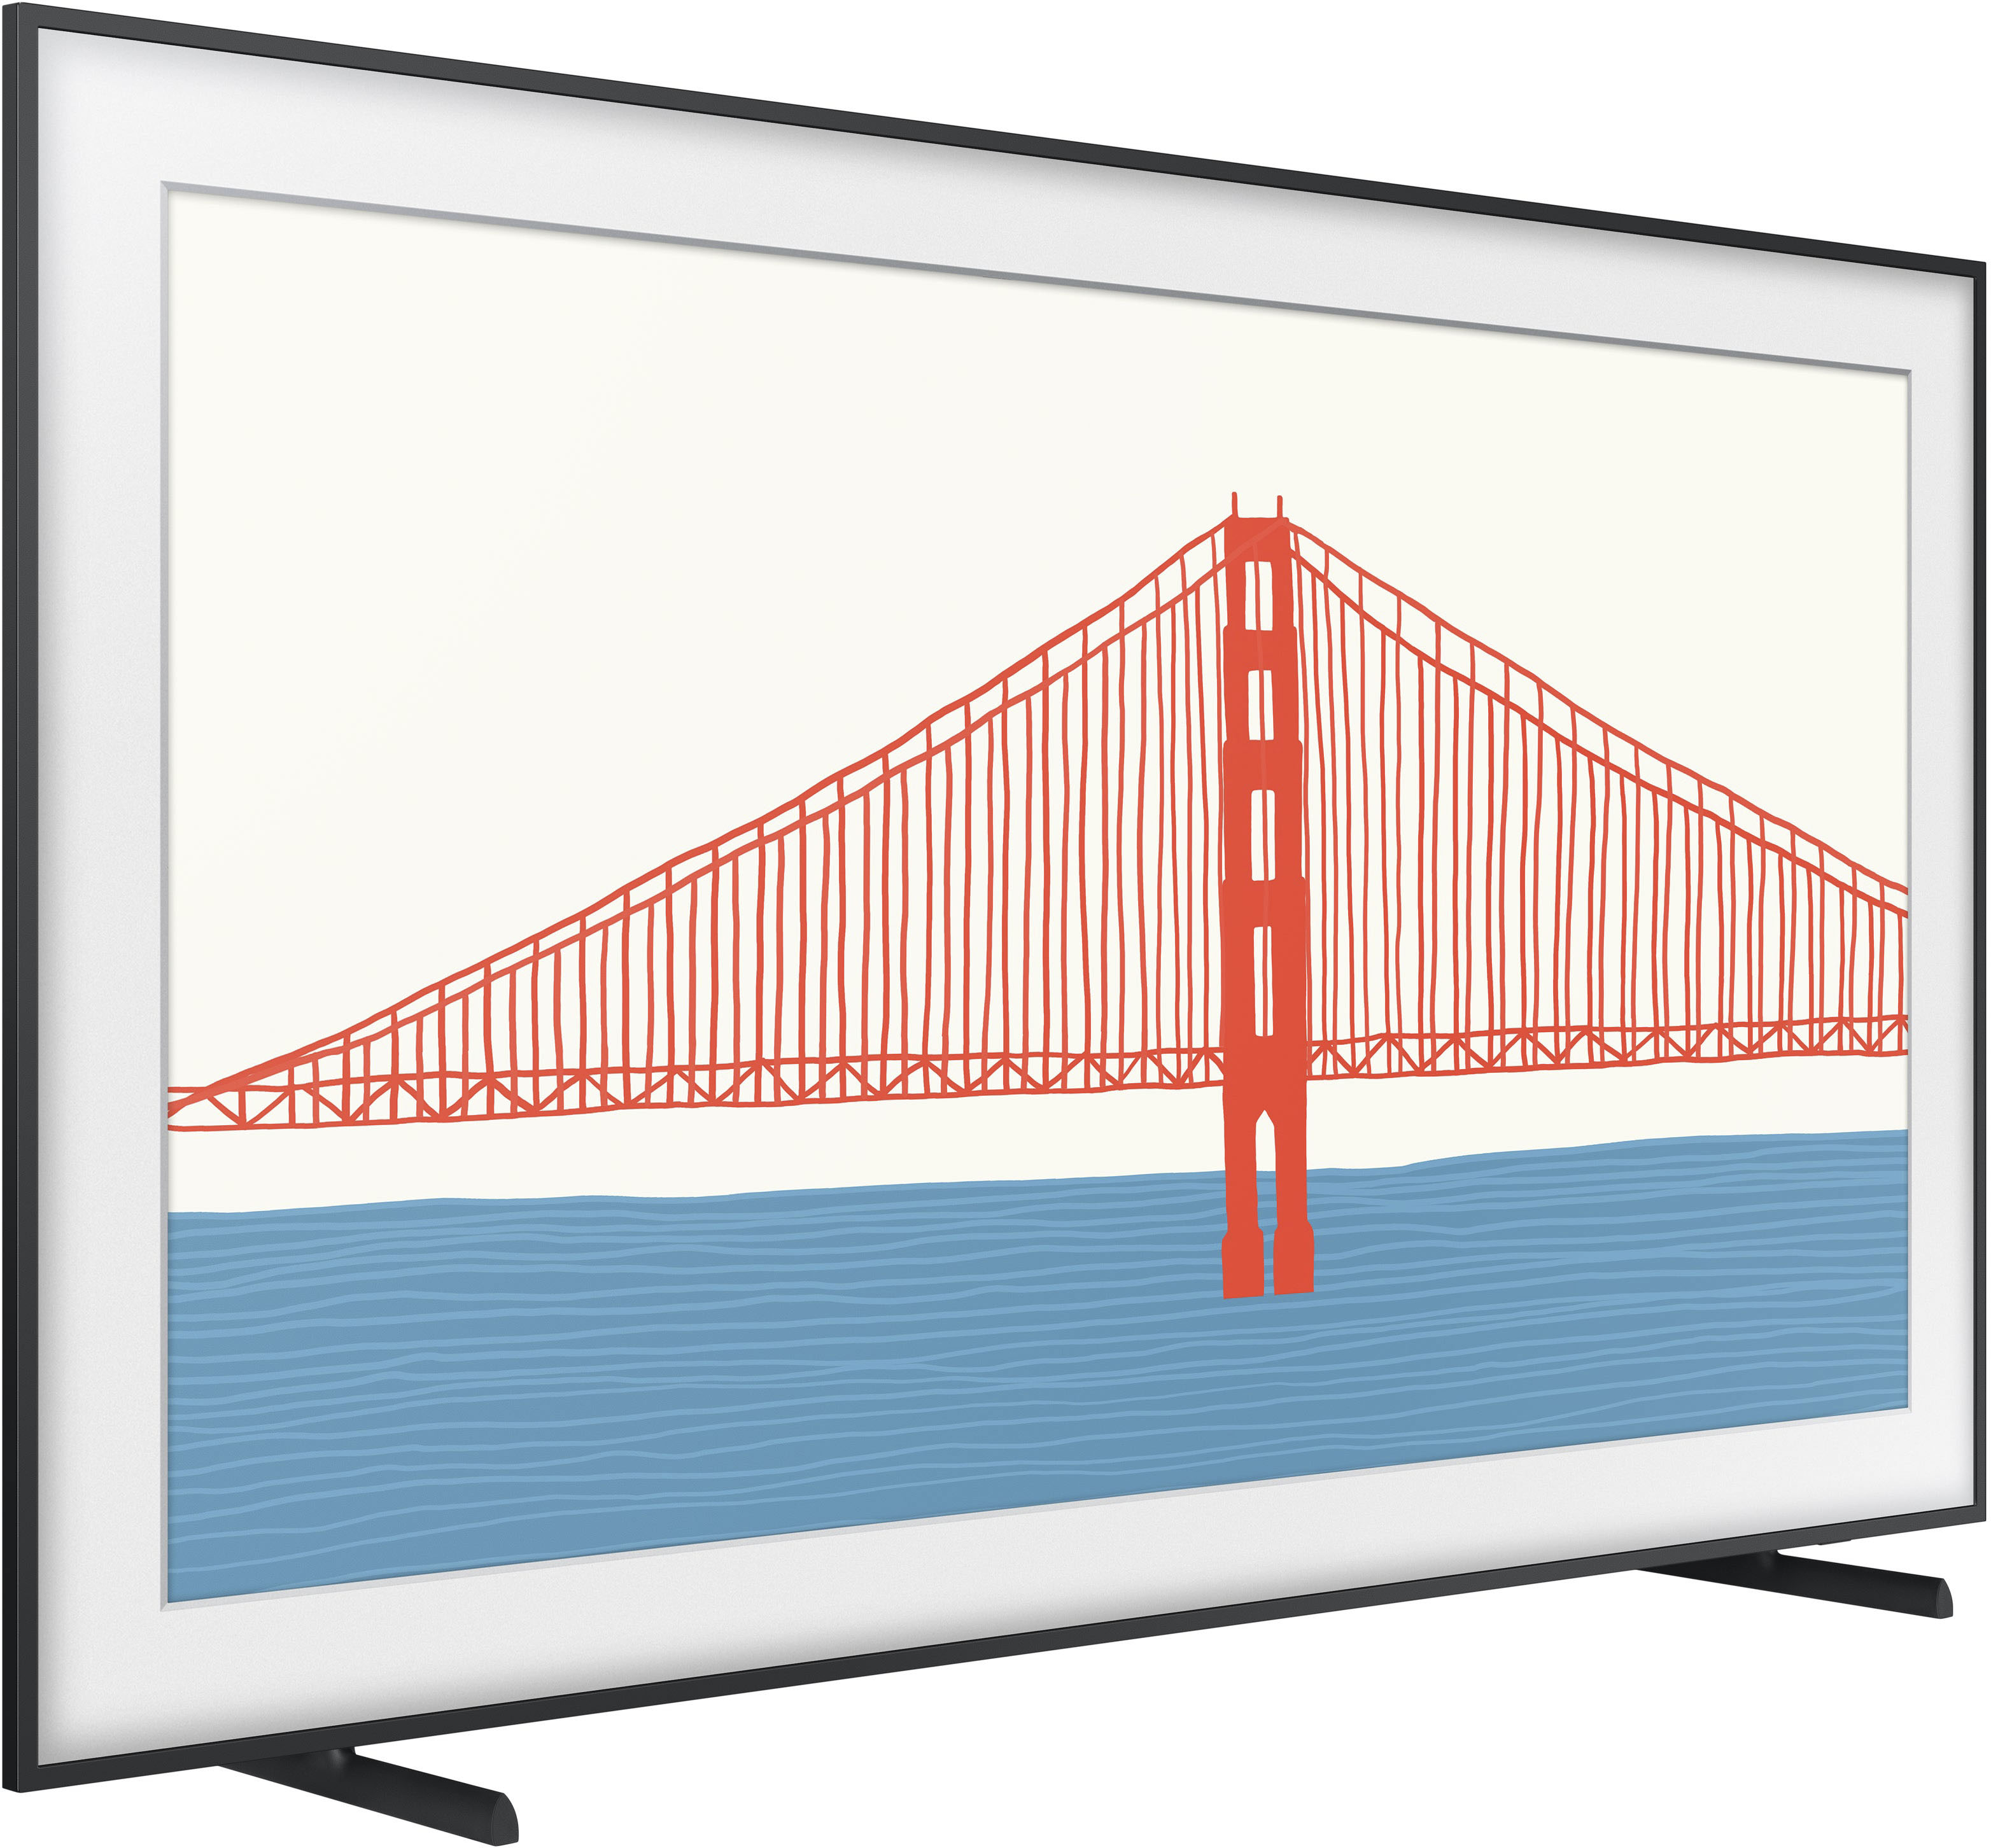 Buy Samsung The Frame TV? - Coolblue - Before 23:59, delivered tomorrow